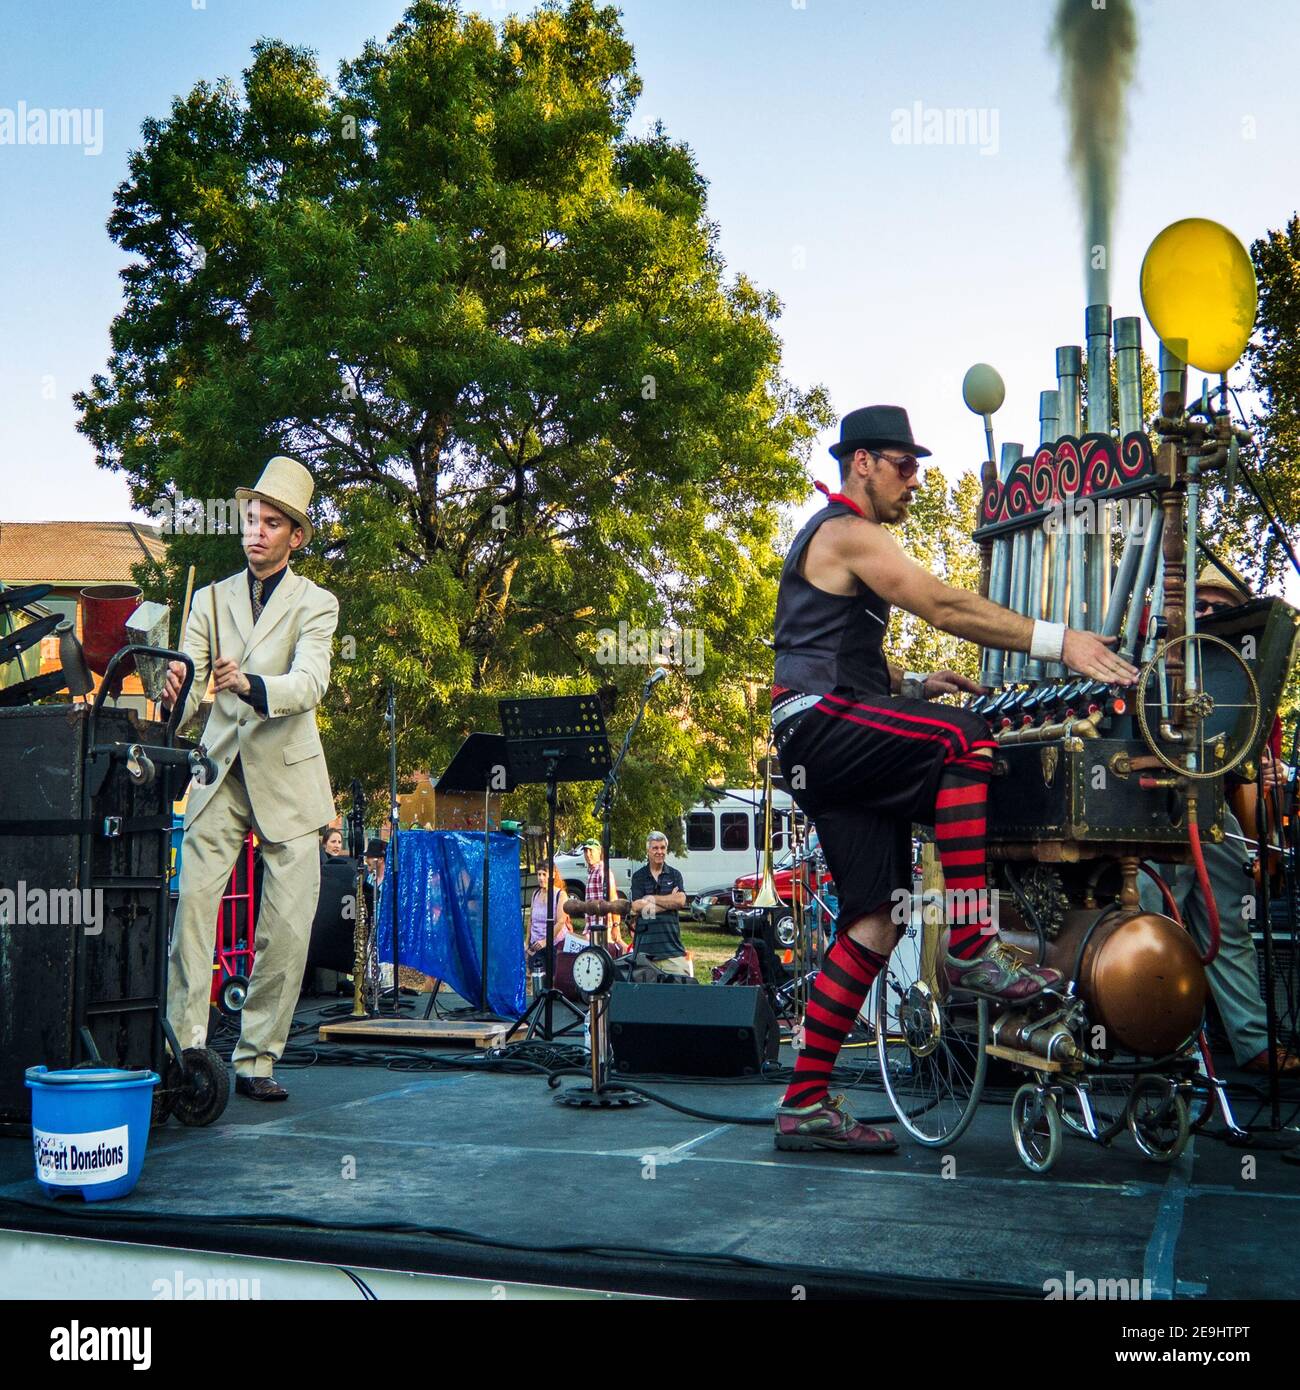 Wanderlust Circus Orchestra performing at Sellwood Riverside Park in Portland - 08/04/2014 Stock Photo